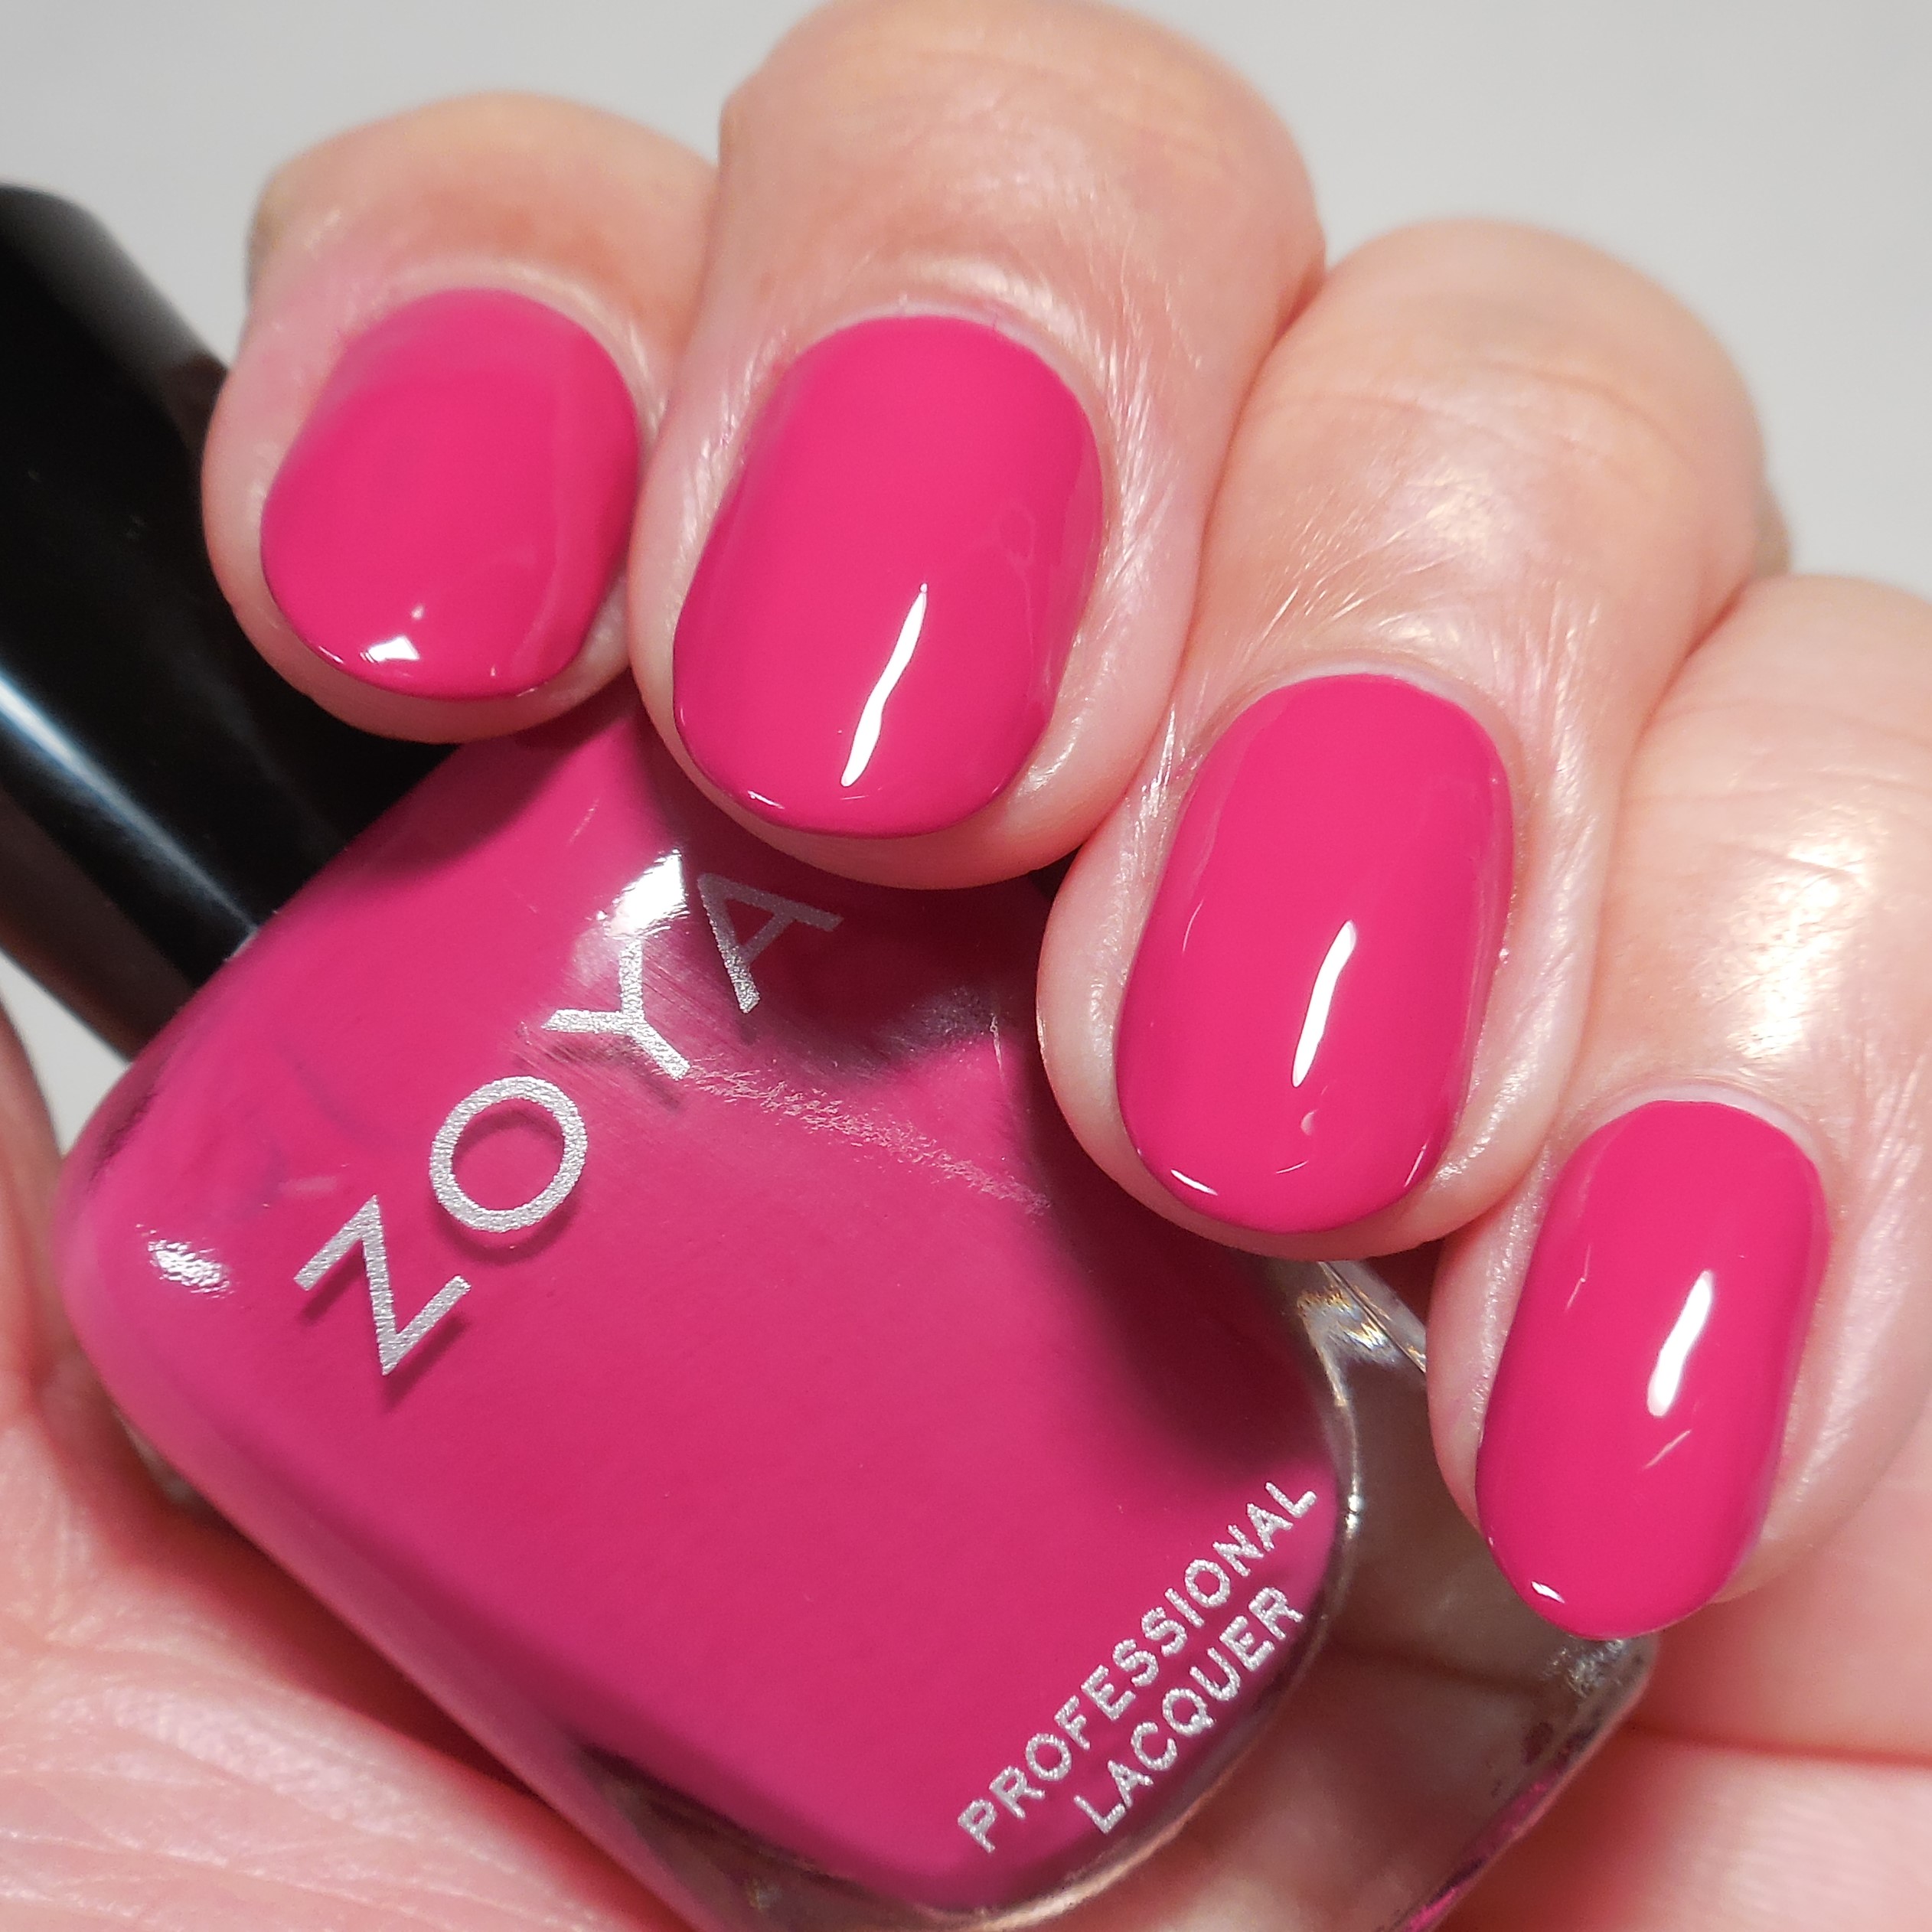 Neutral & Bright: Zoya Naomi, Rescue Beauty Lounge Pink Shimmer, Chanel  Enthusiast - The Beauty Look Book